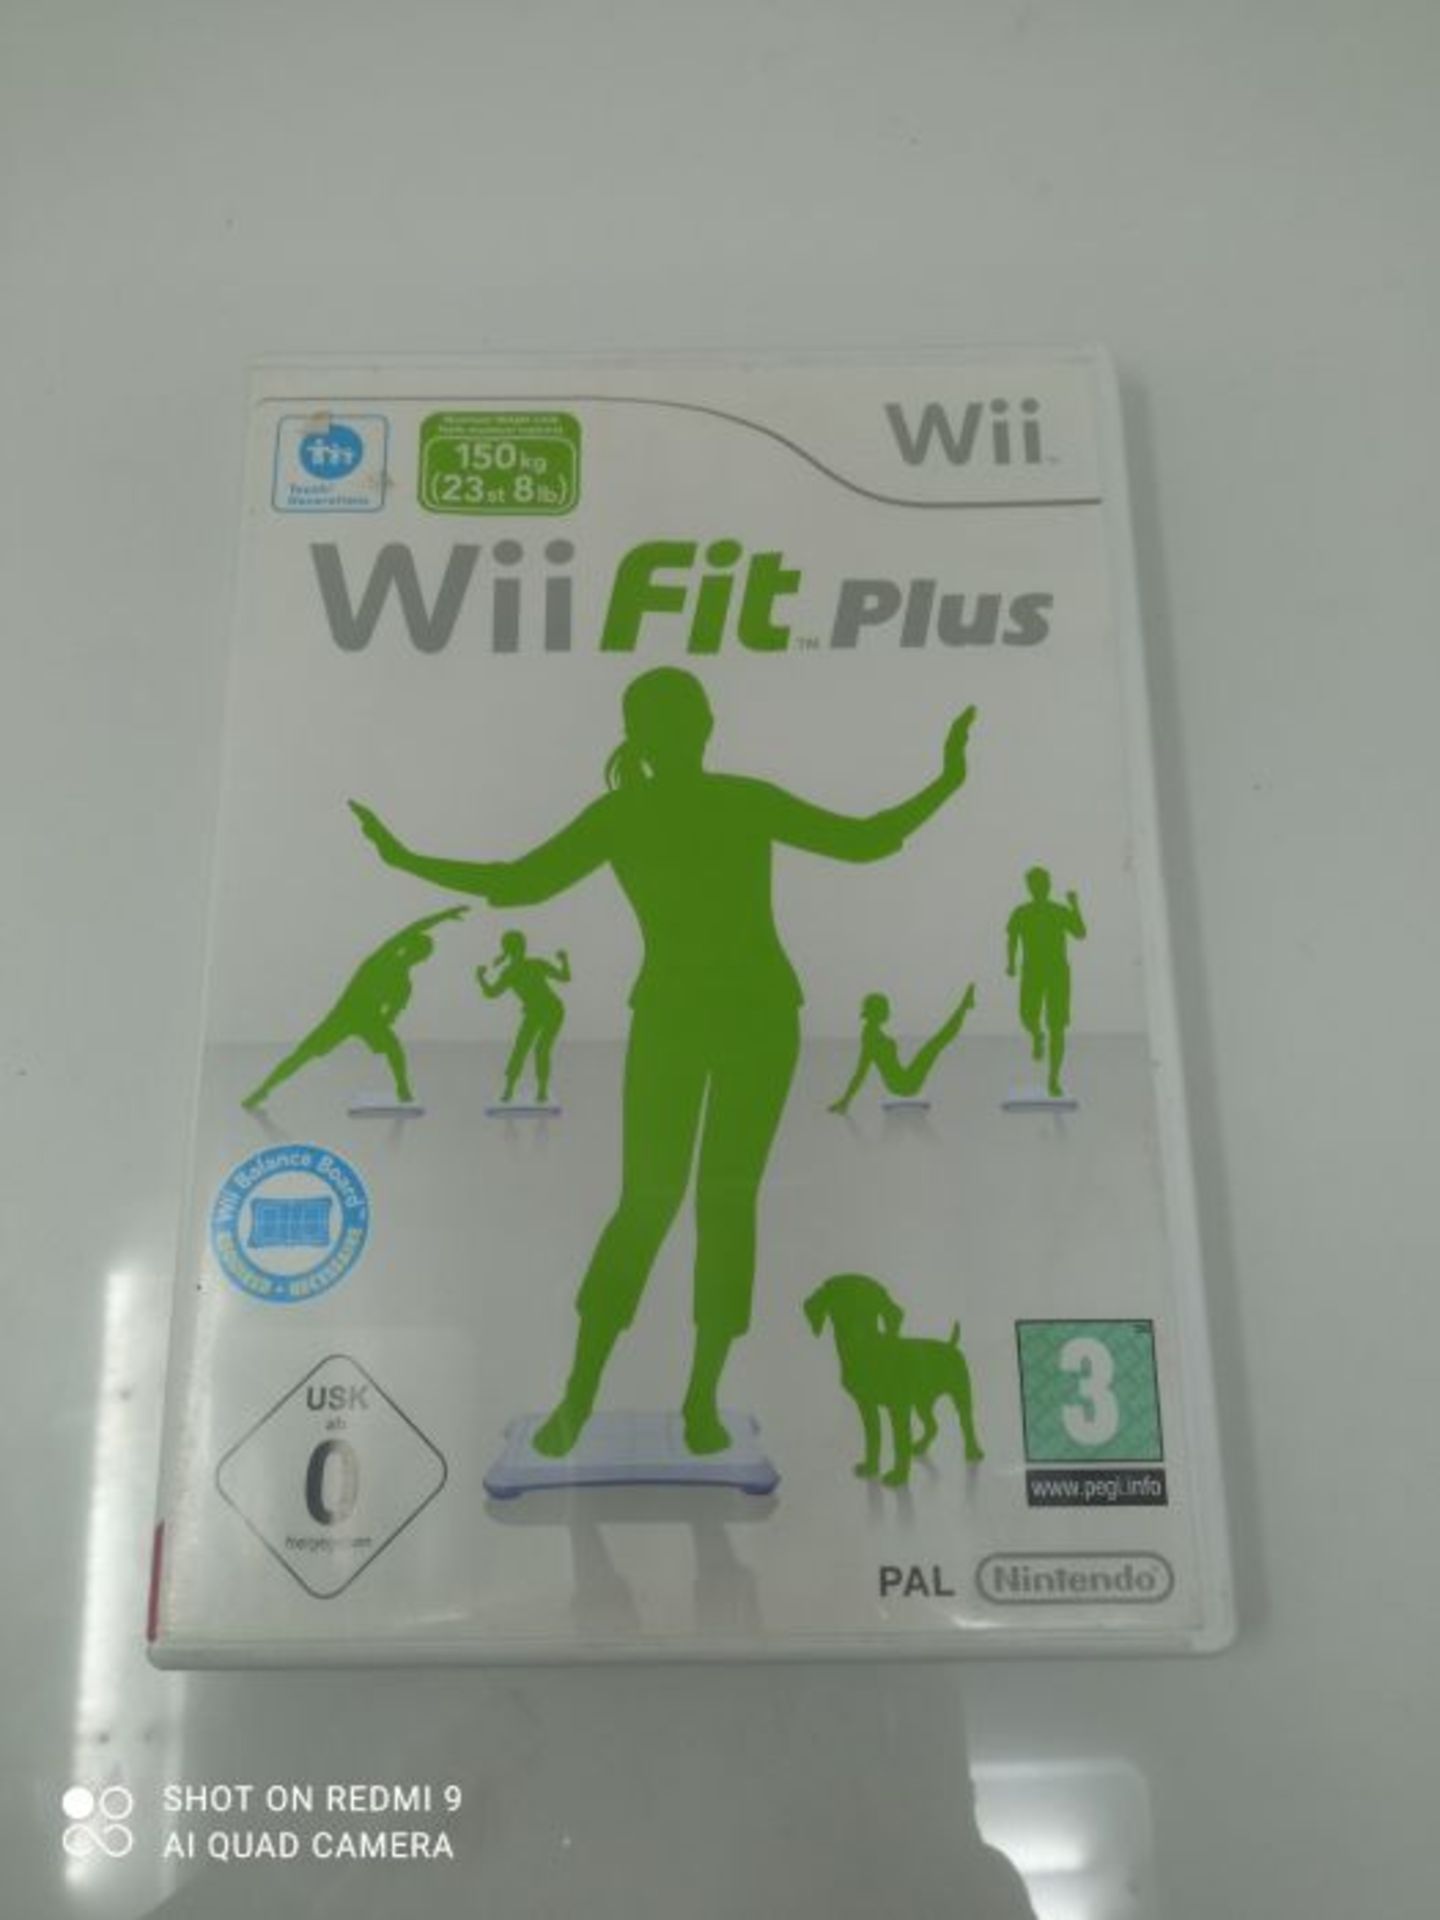 Wii Fit Plus game - Image 2 of 6